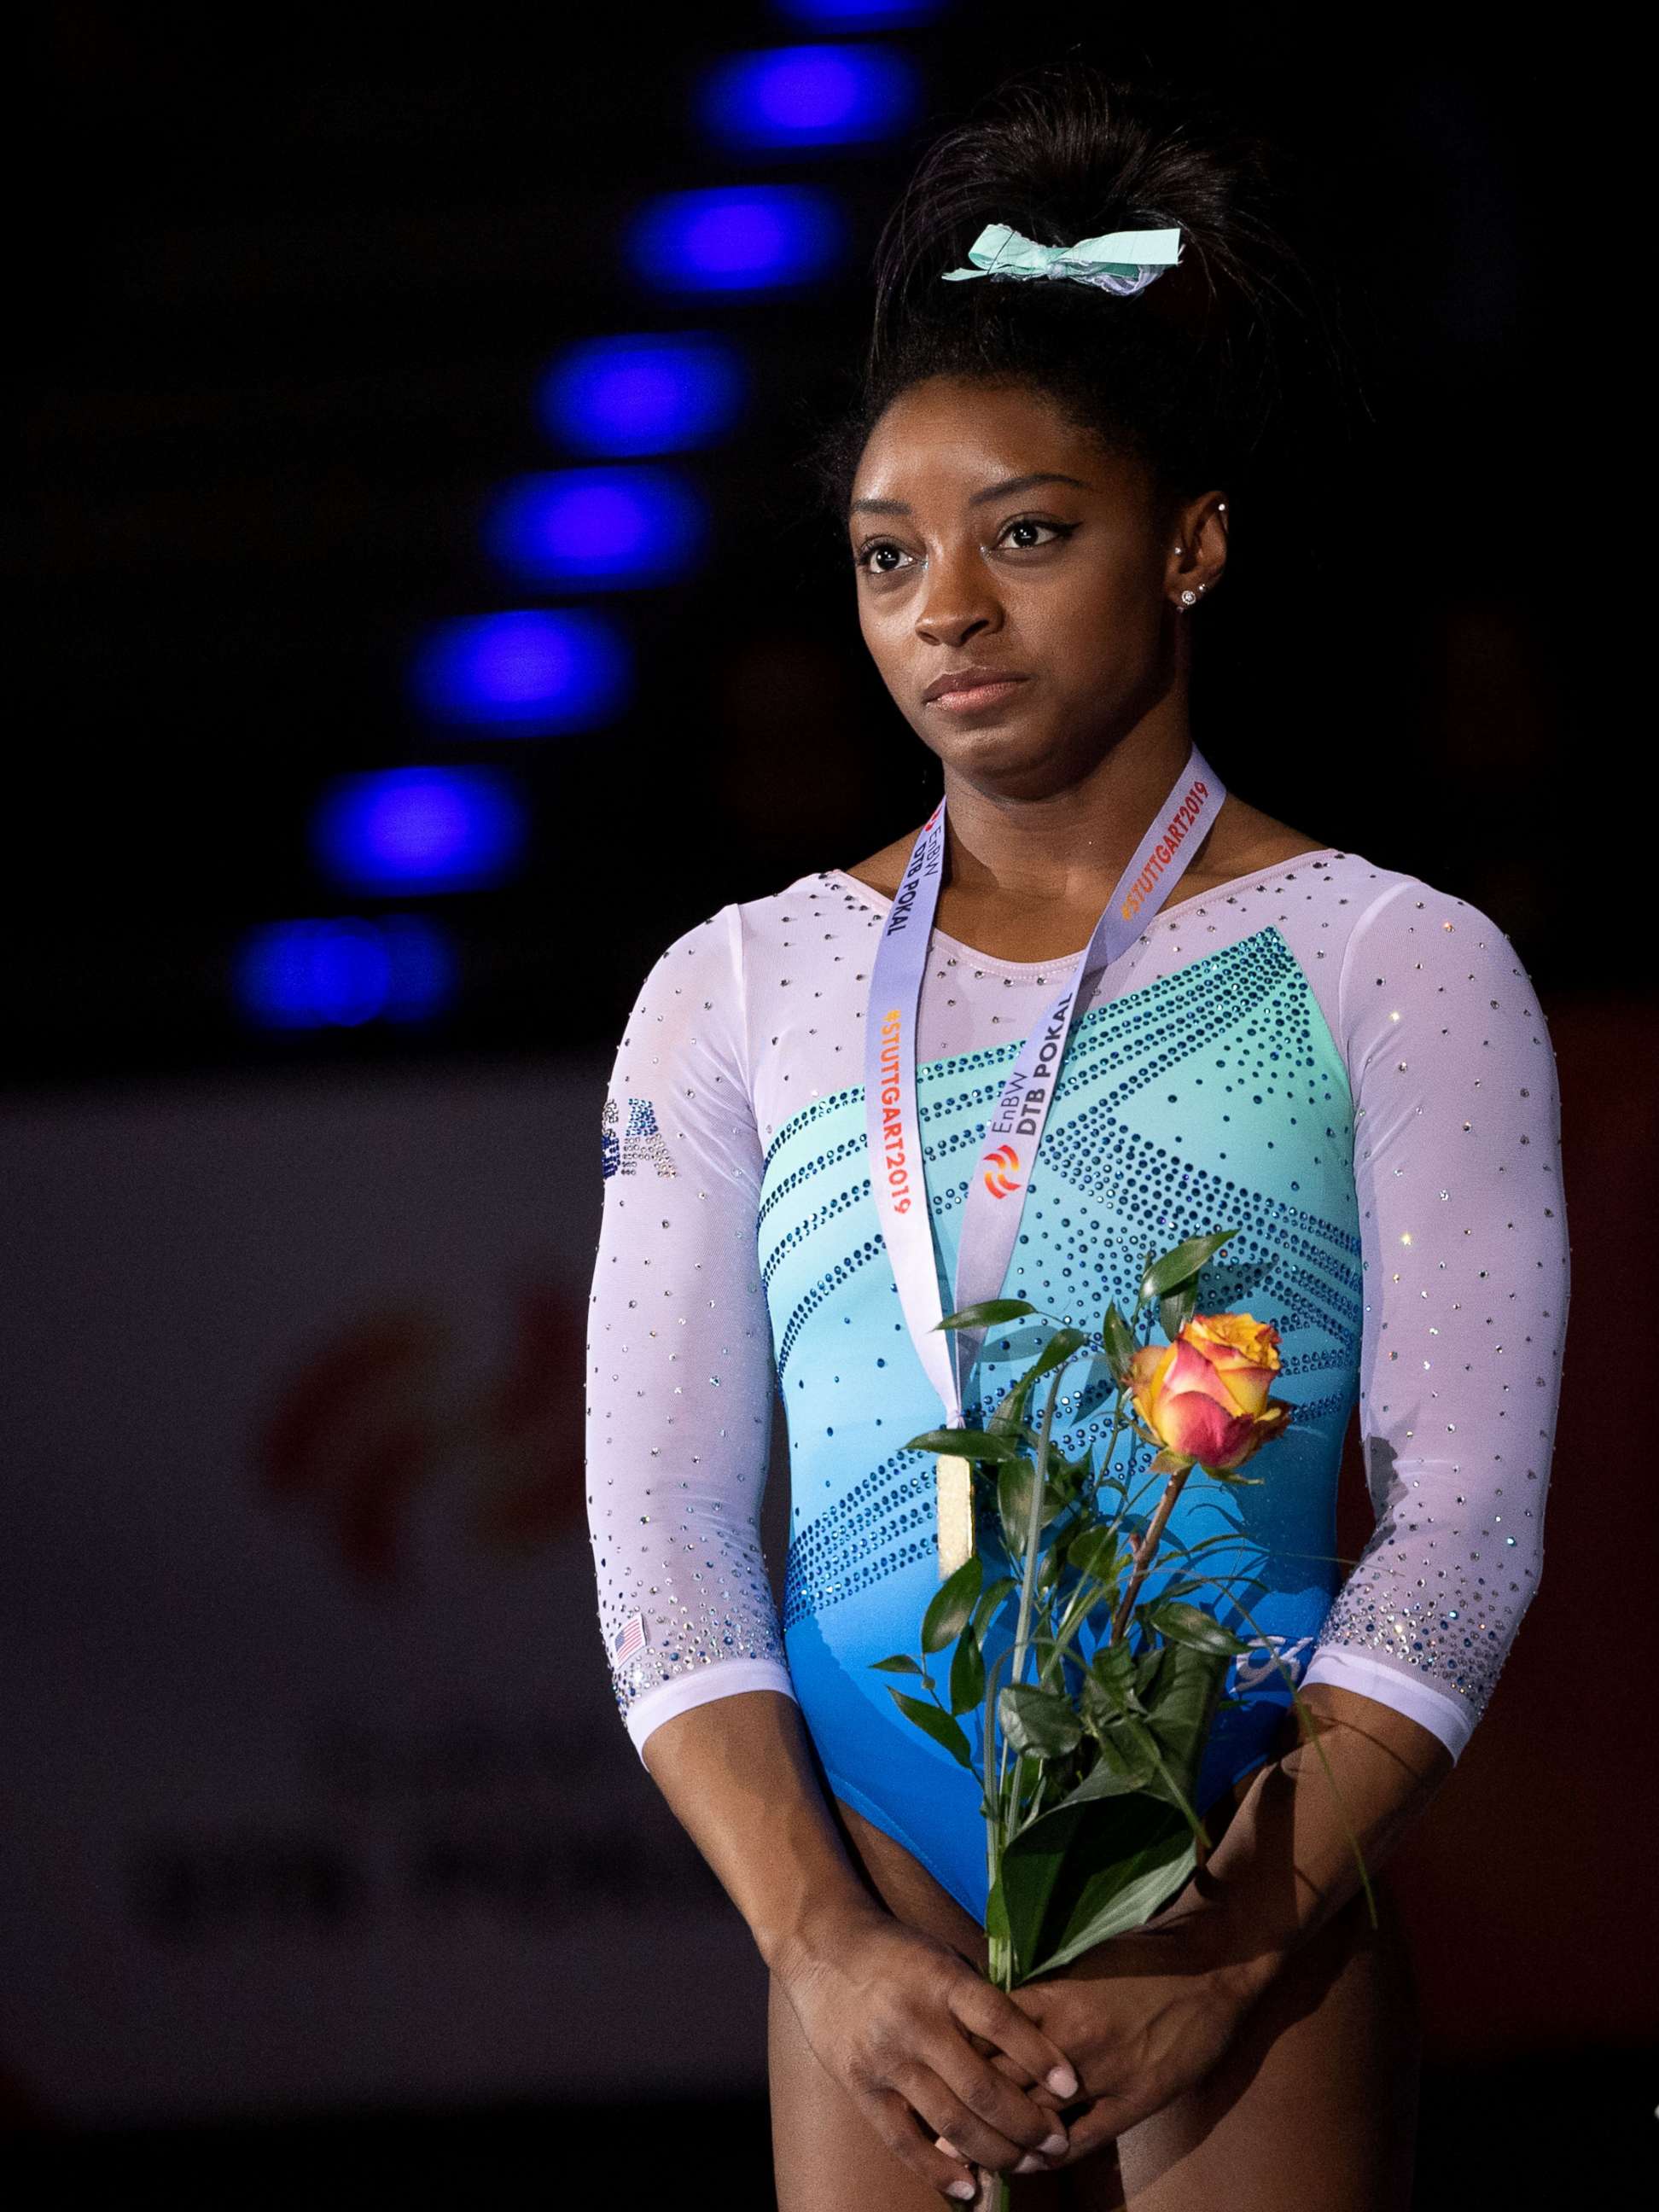 PHOTO: In this March 17, 2019, file photo, Simone Biles is shown at the 2019 FIG Artistic Gymnatics World Cup all-around awards ceremony, in Stuttgart, Germany.